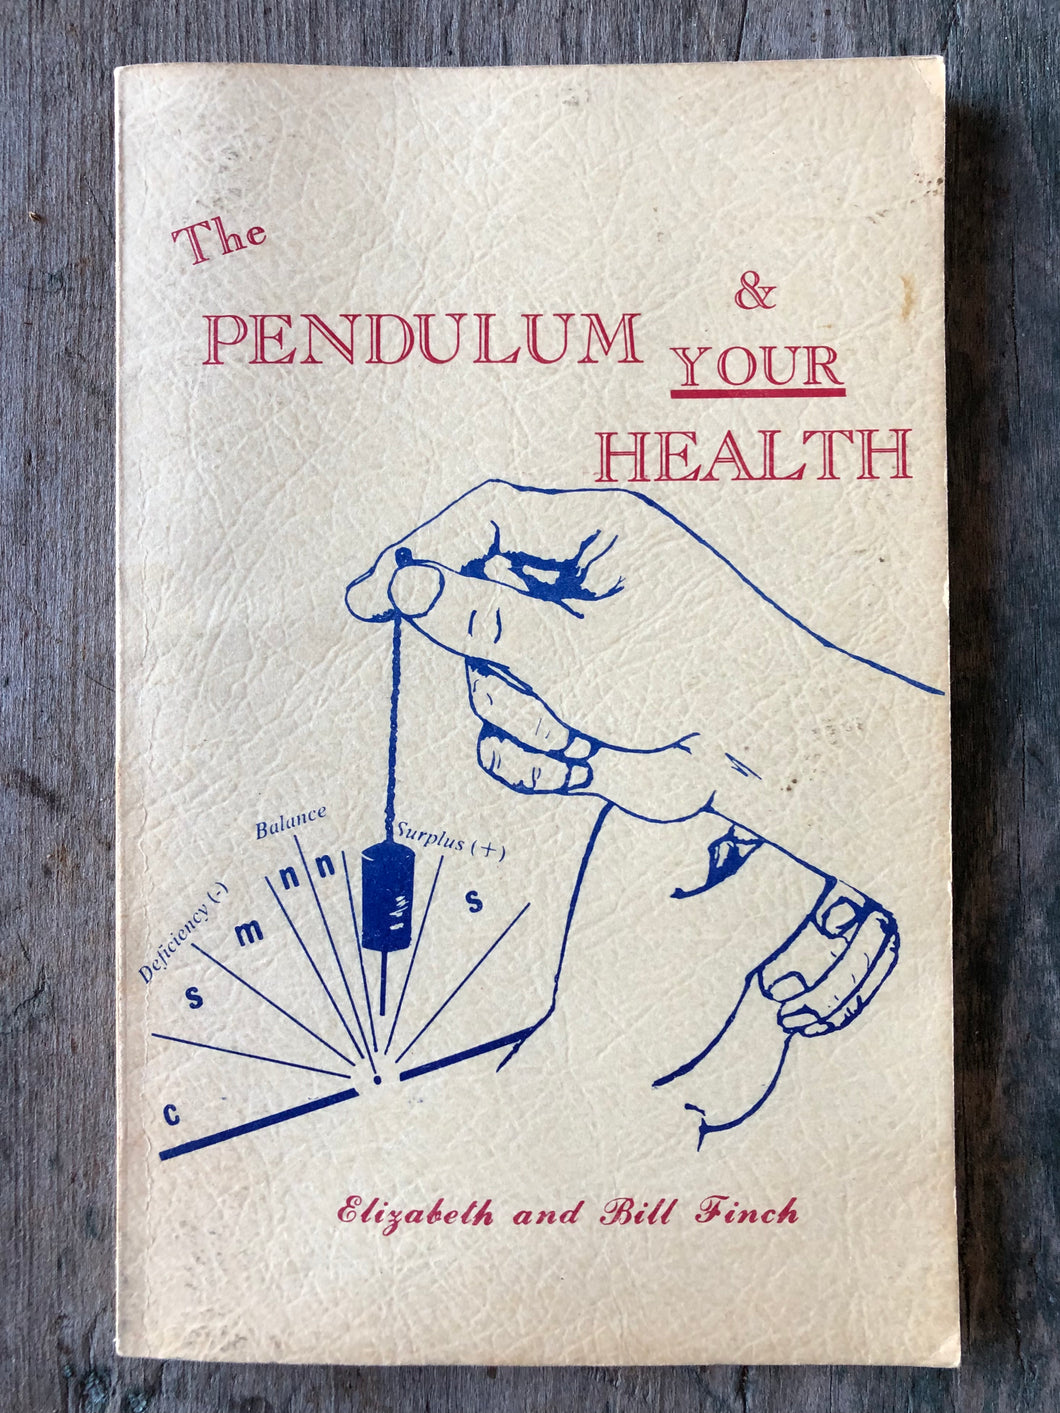 The Pendulum & Your Health by Elizabeth and Bill Finch